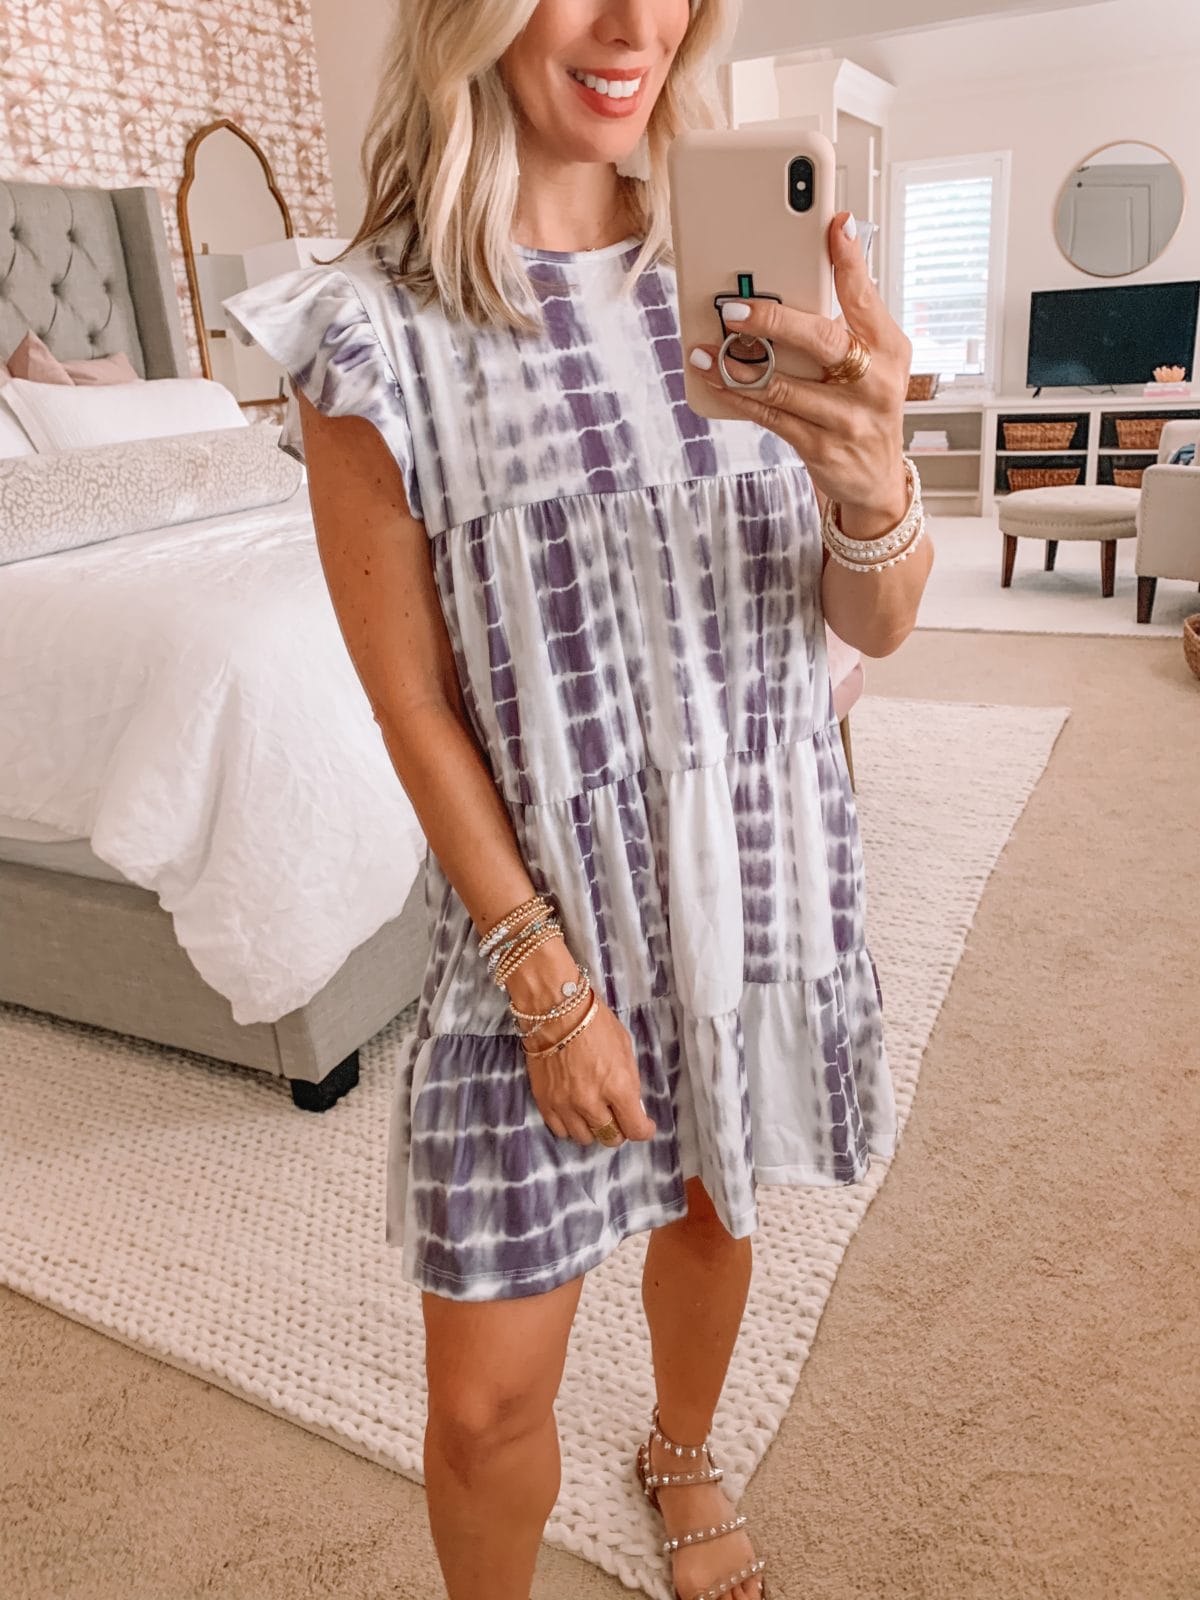 Amazon Fashion Finds, Tie Dye Tiered Dress, Studded Sandals 